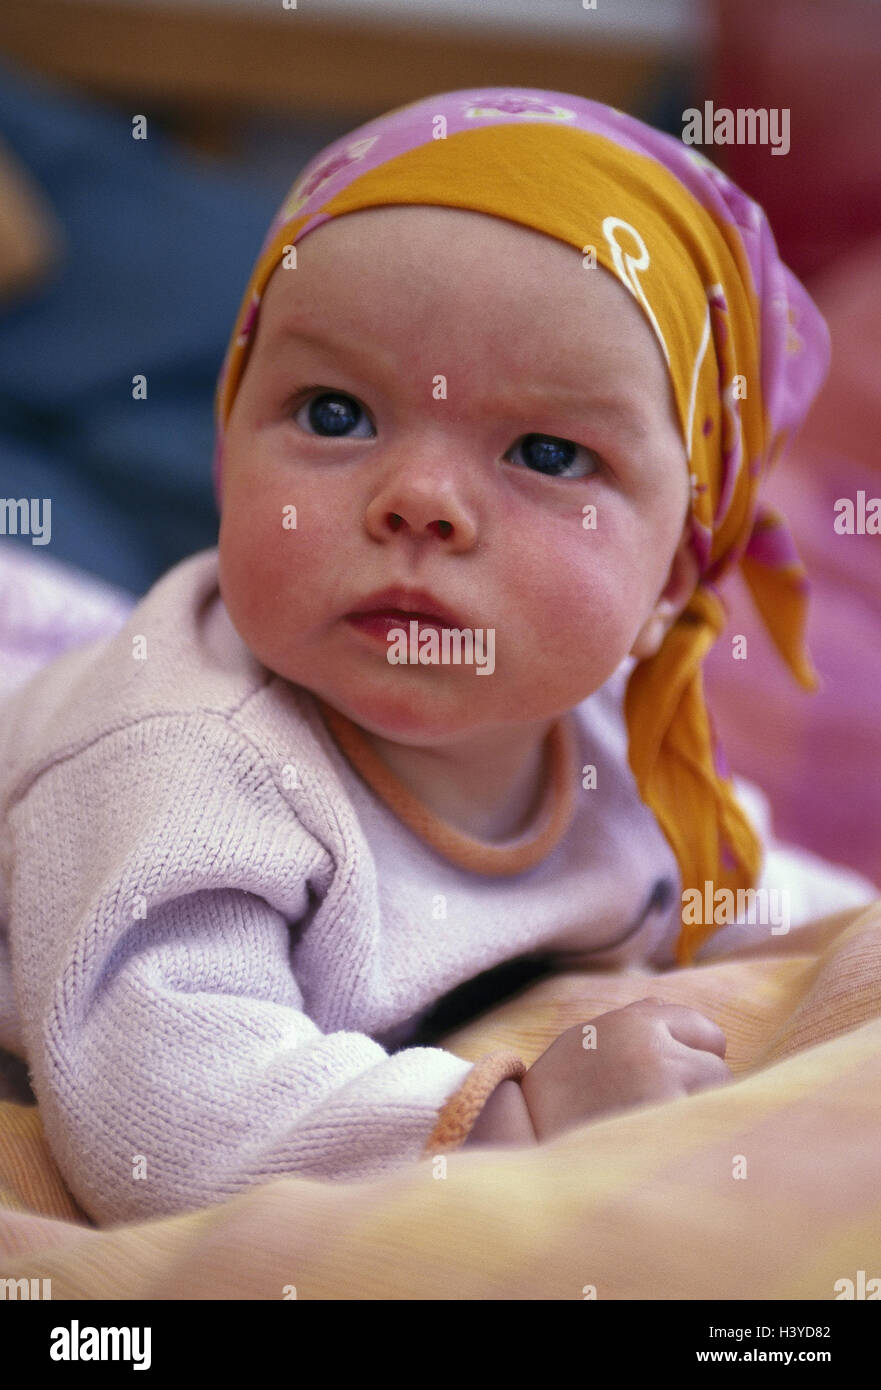 Baby, headscarf, abdominal position, doubtfully, very close, inside, child, infant, headgear, expression, scepticism, seriously, dissatisfied, discontent, unhappily Stock Photo